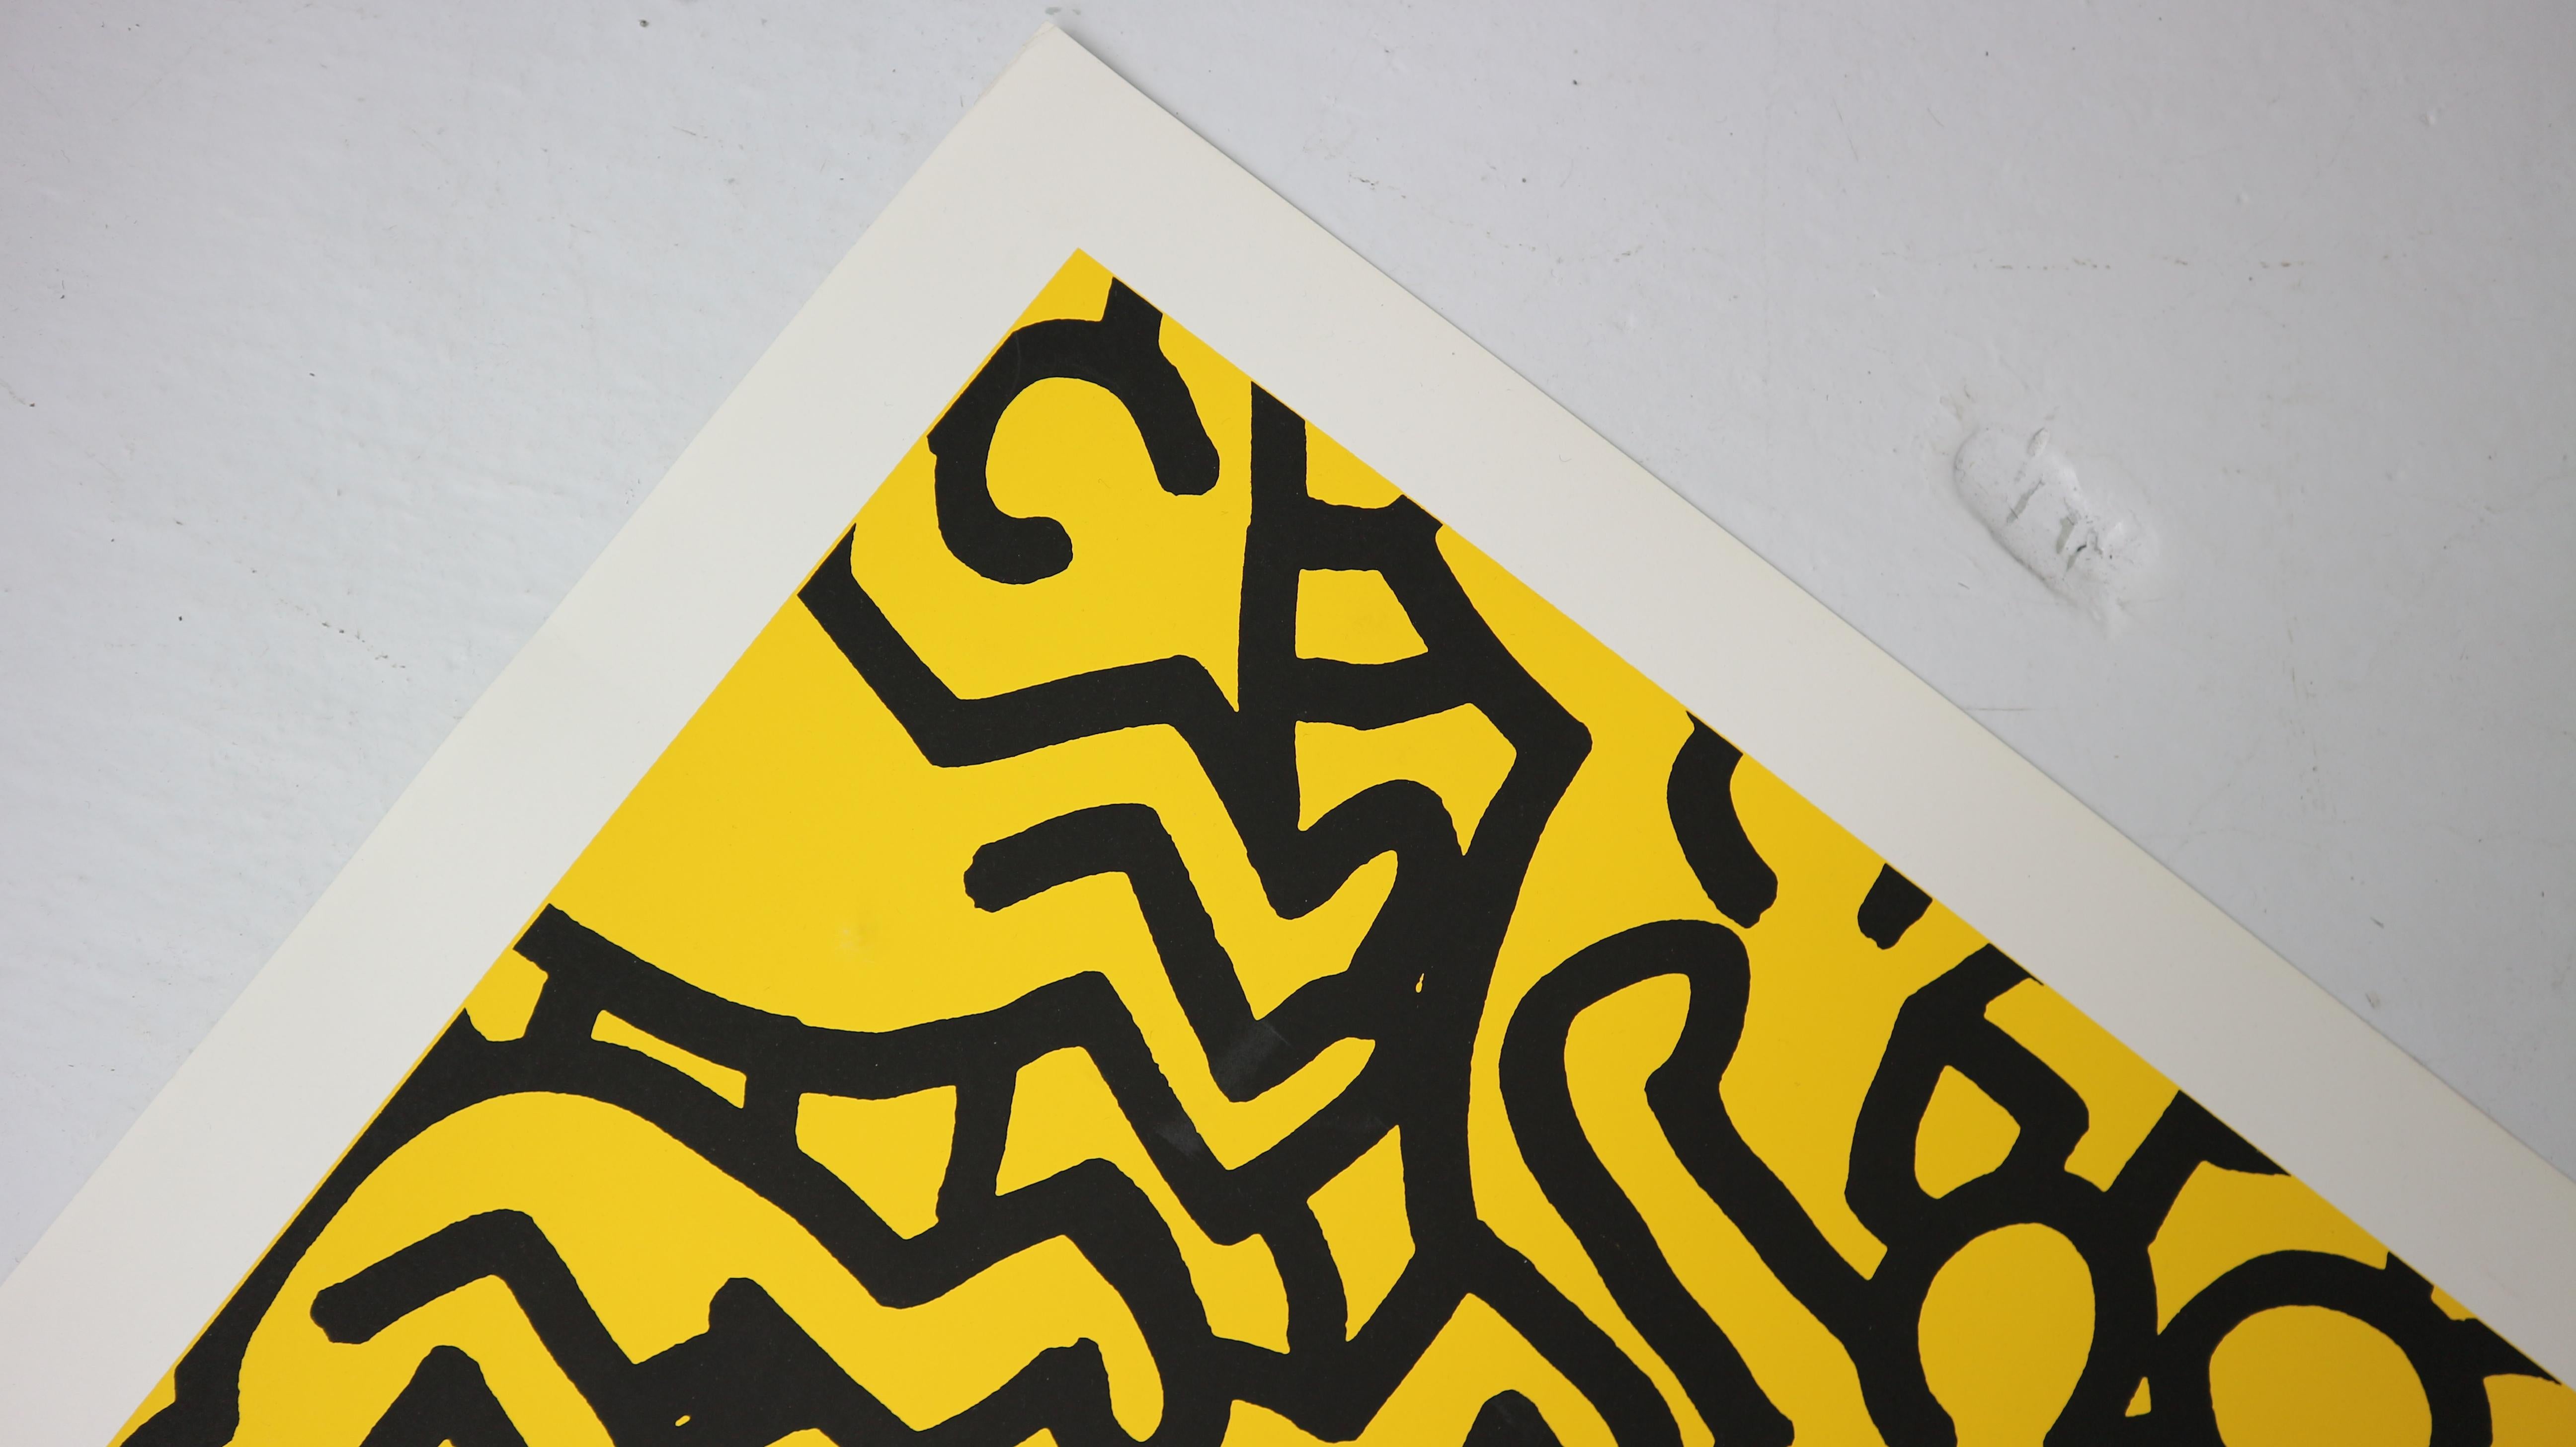 Special Edition silkscreen by Keith Haring 